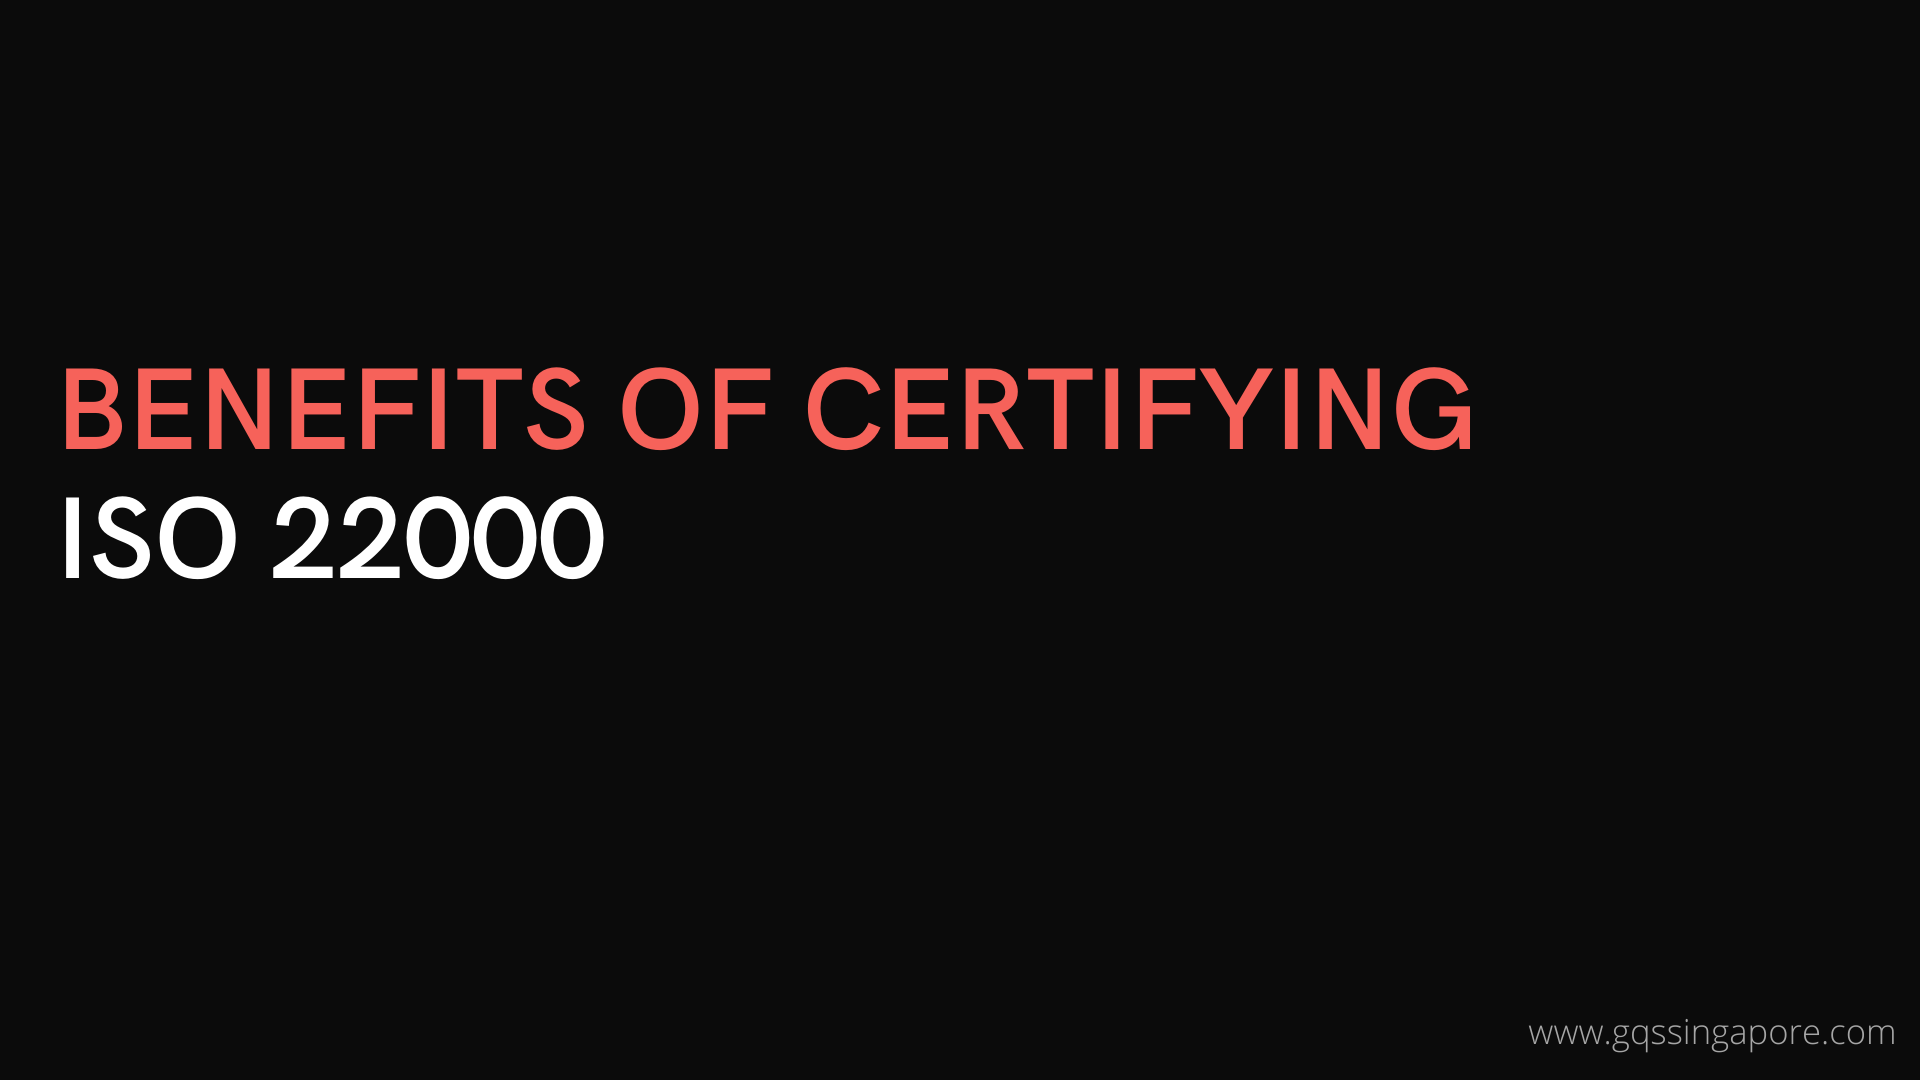 BENEFITS OF CERTIFYING TO ISO 22000